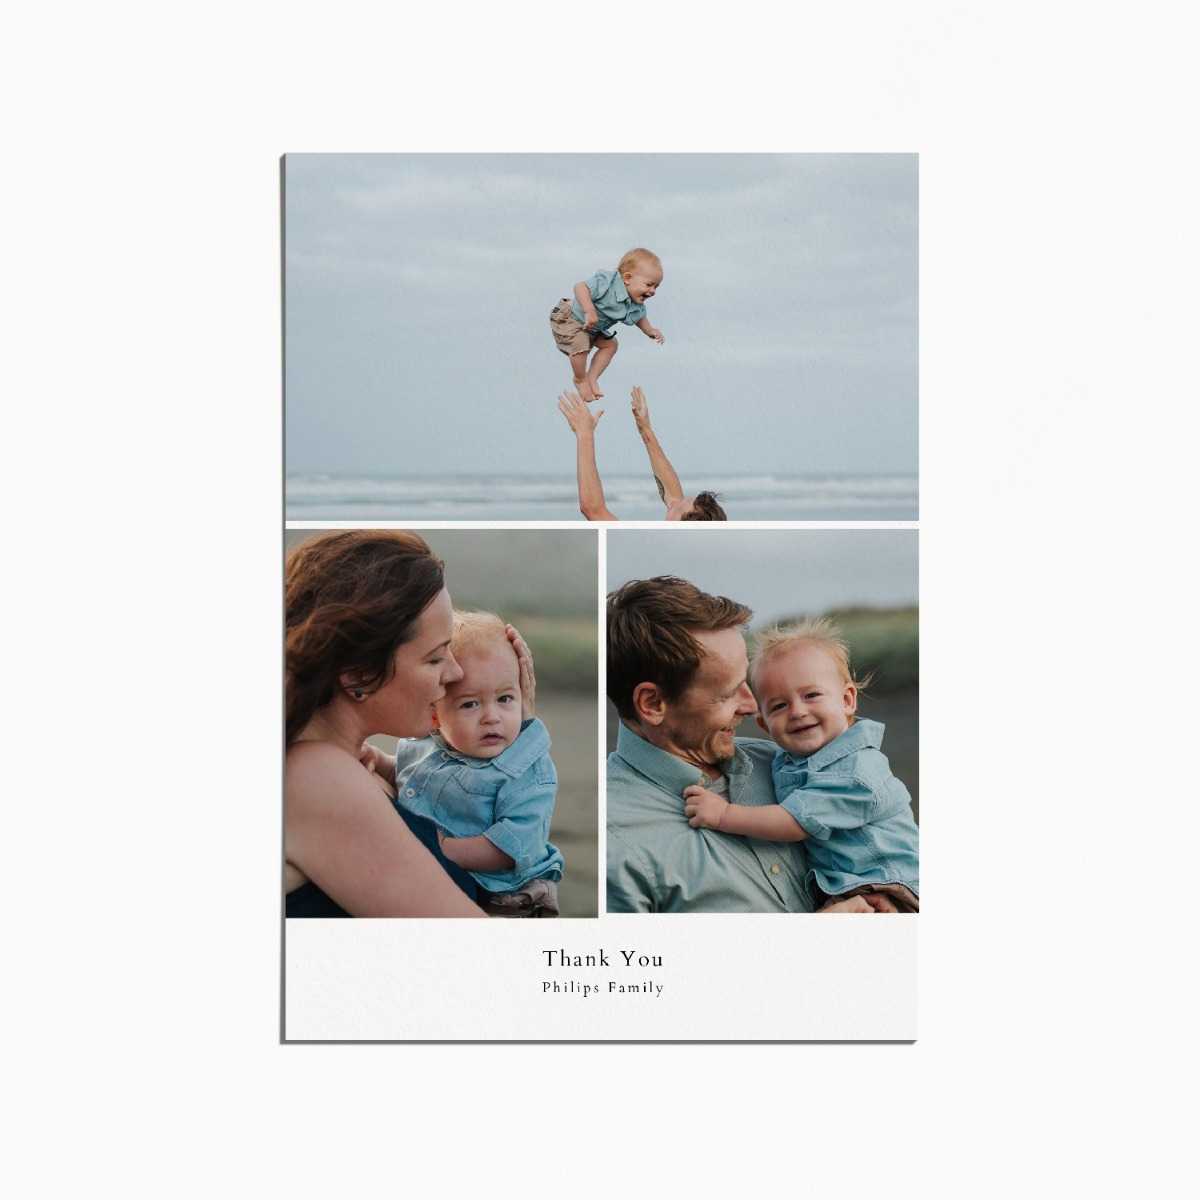 thank you card with three images of a family. image 1 shows a baby being lifted into the air. Image 2 shows the mother holding the baby and image 3 shows the father holding the baby